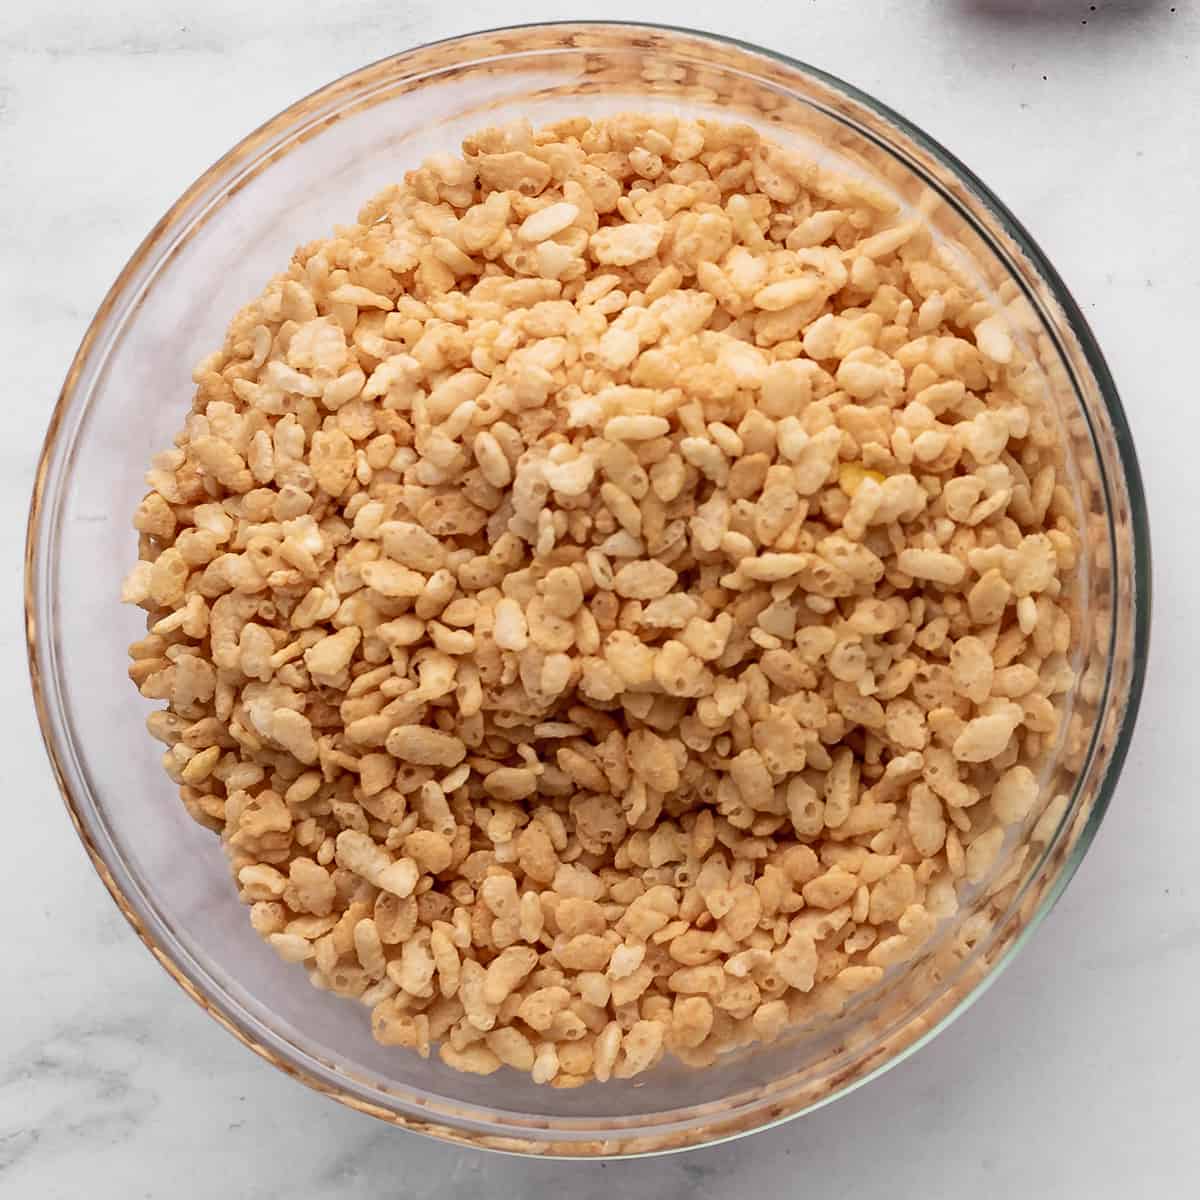 rice crispy cereal measured out into a glass bowl